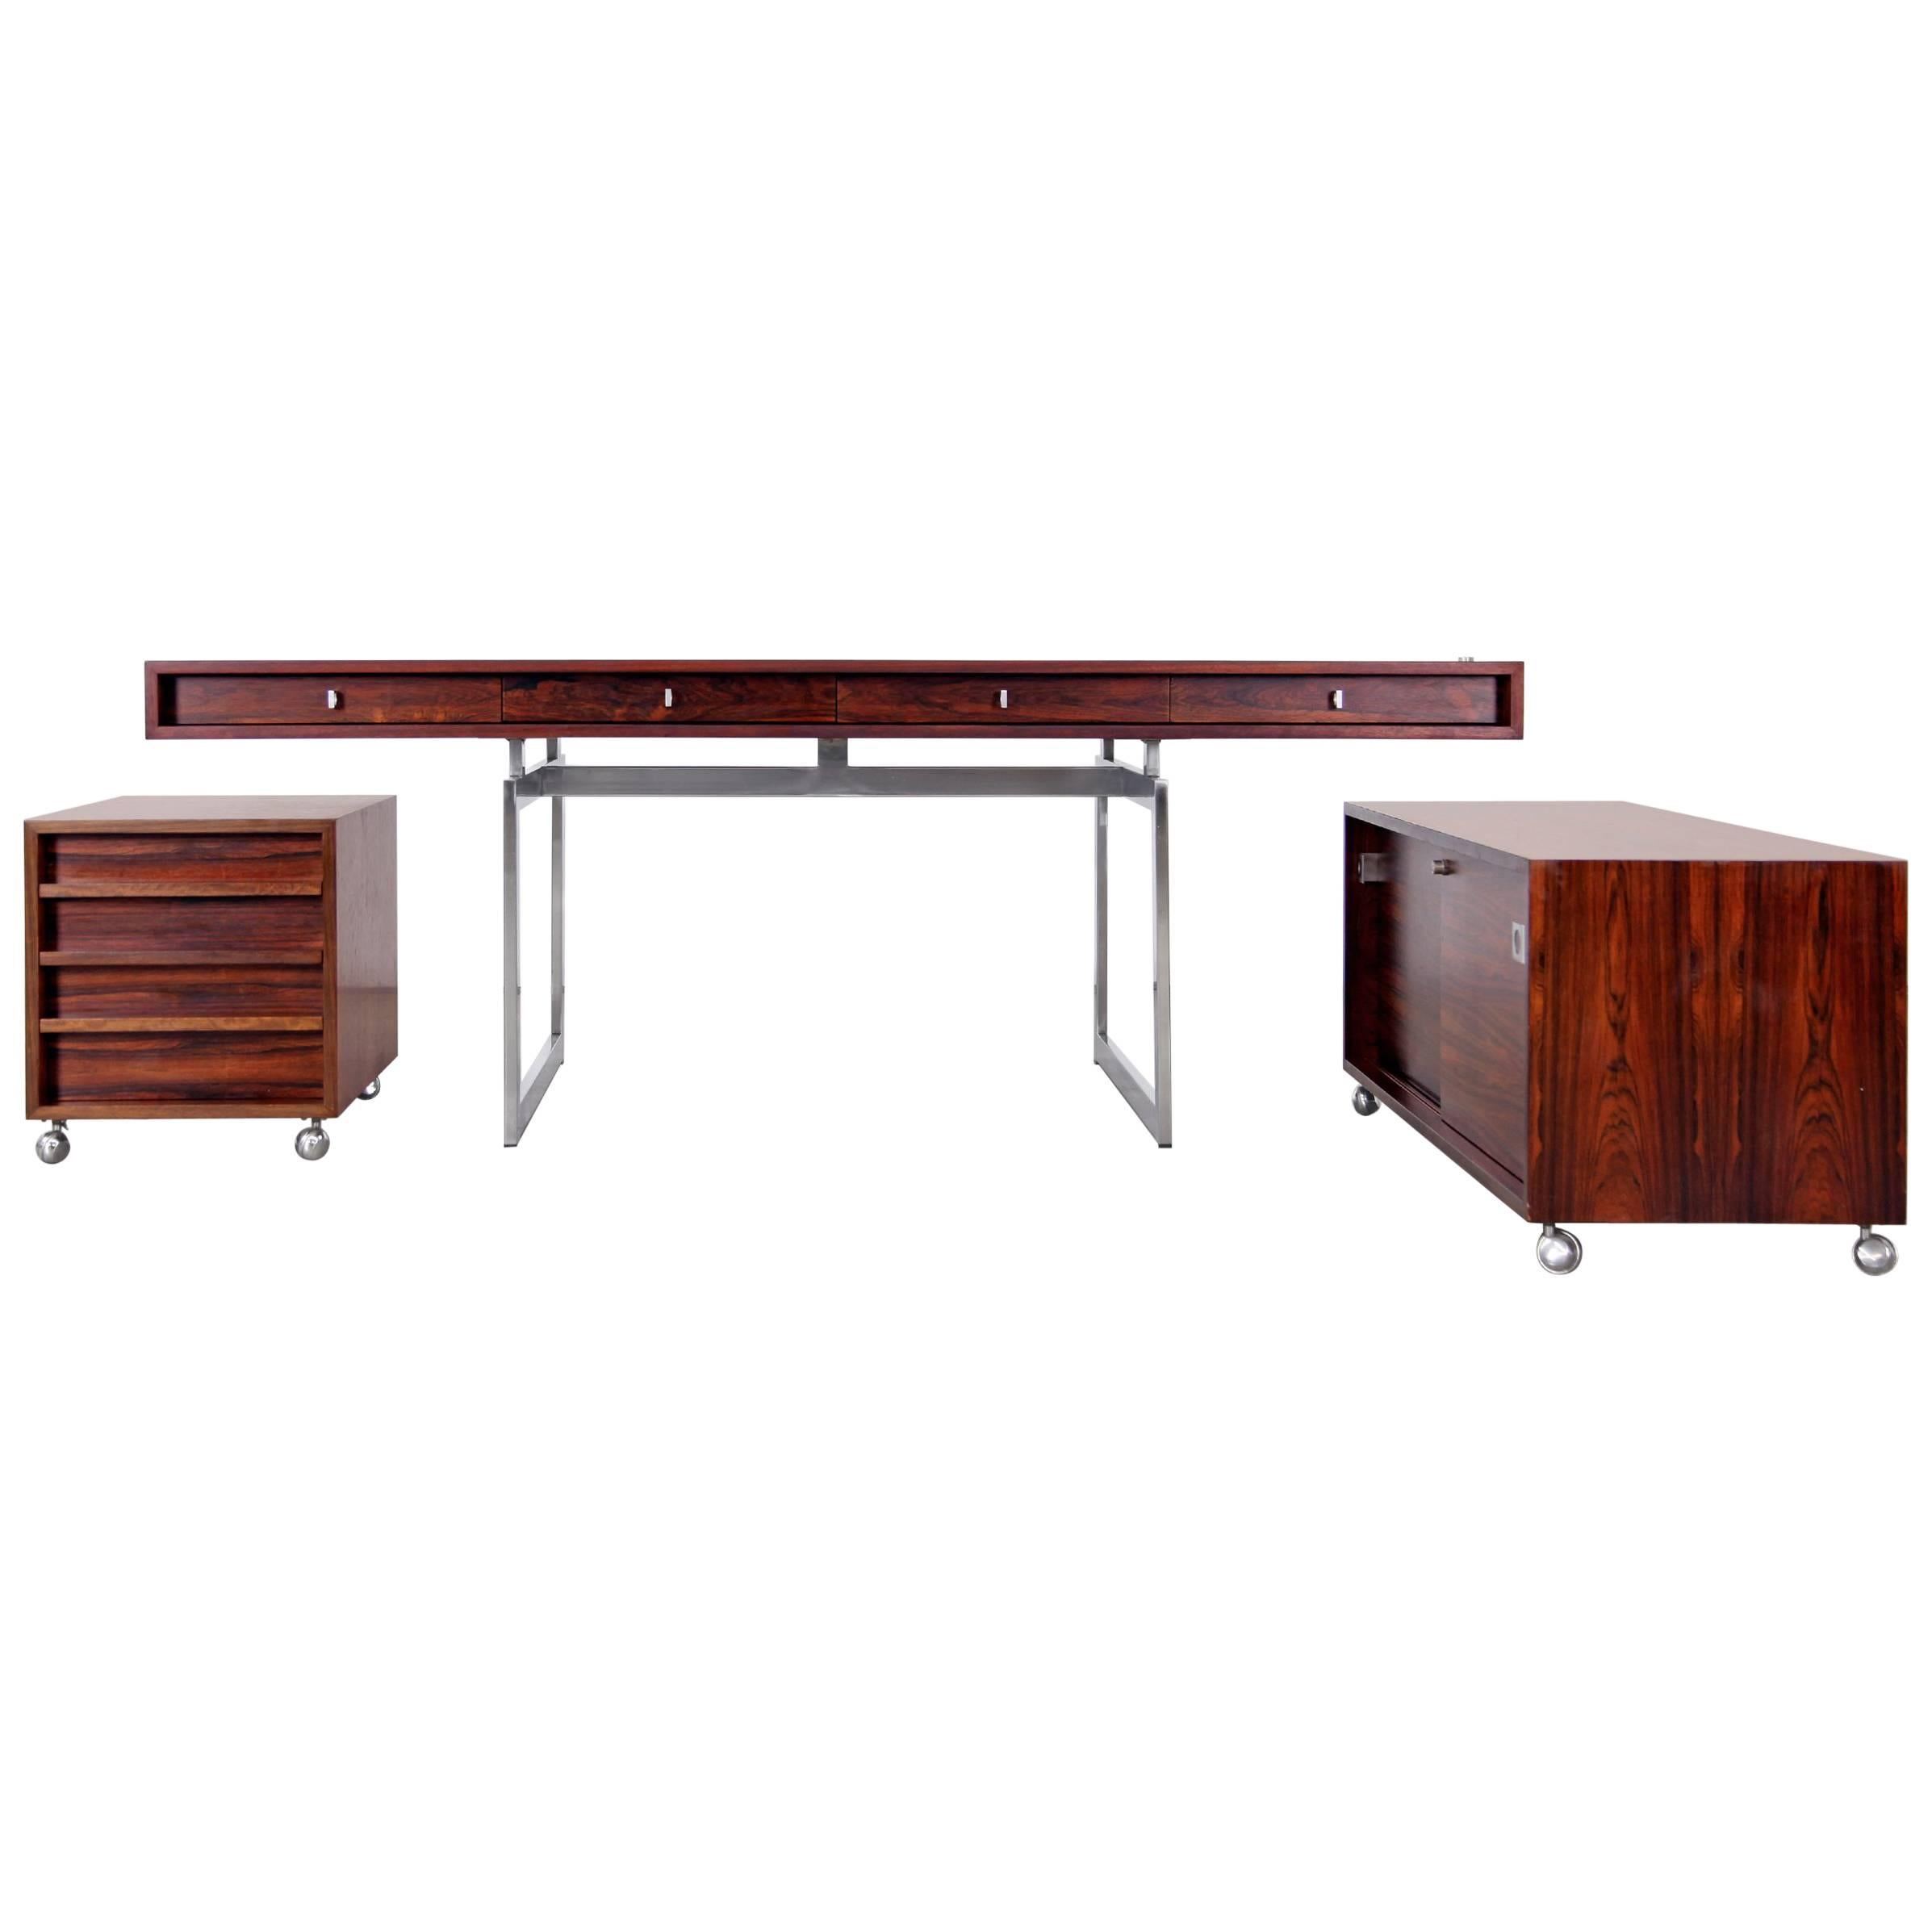 Bodil Kjaer, rare Desk with Chest and Sideboard, Denmark, circa 1959